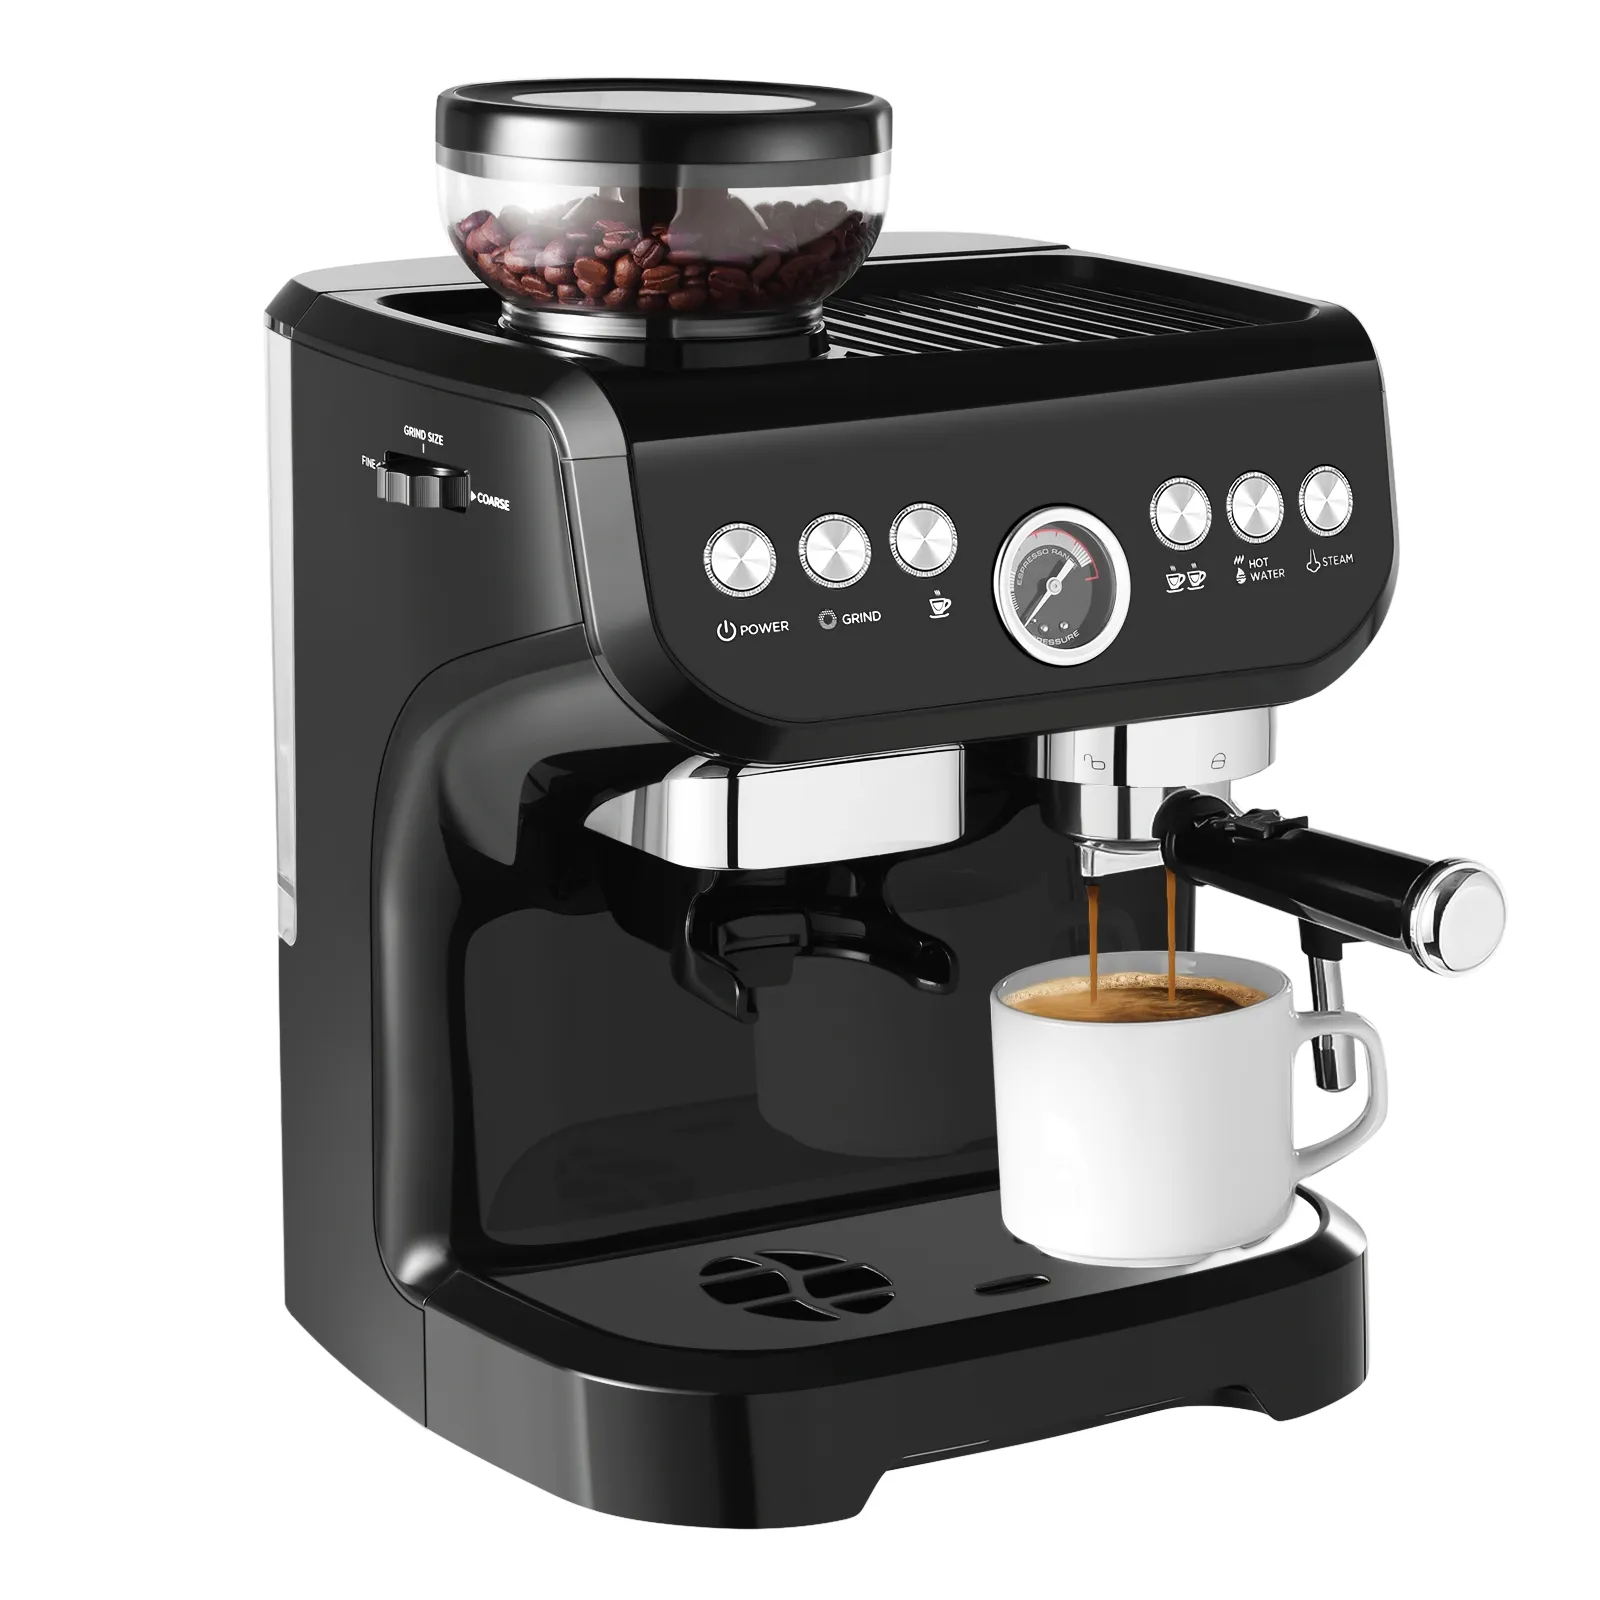 Multi-funtion Fully Automatic 19 BAR Profesional Espresso Coffee Jespresso Machine With Milk Frother